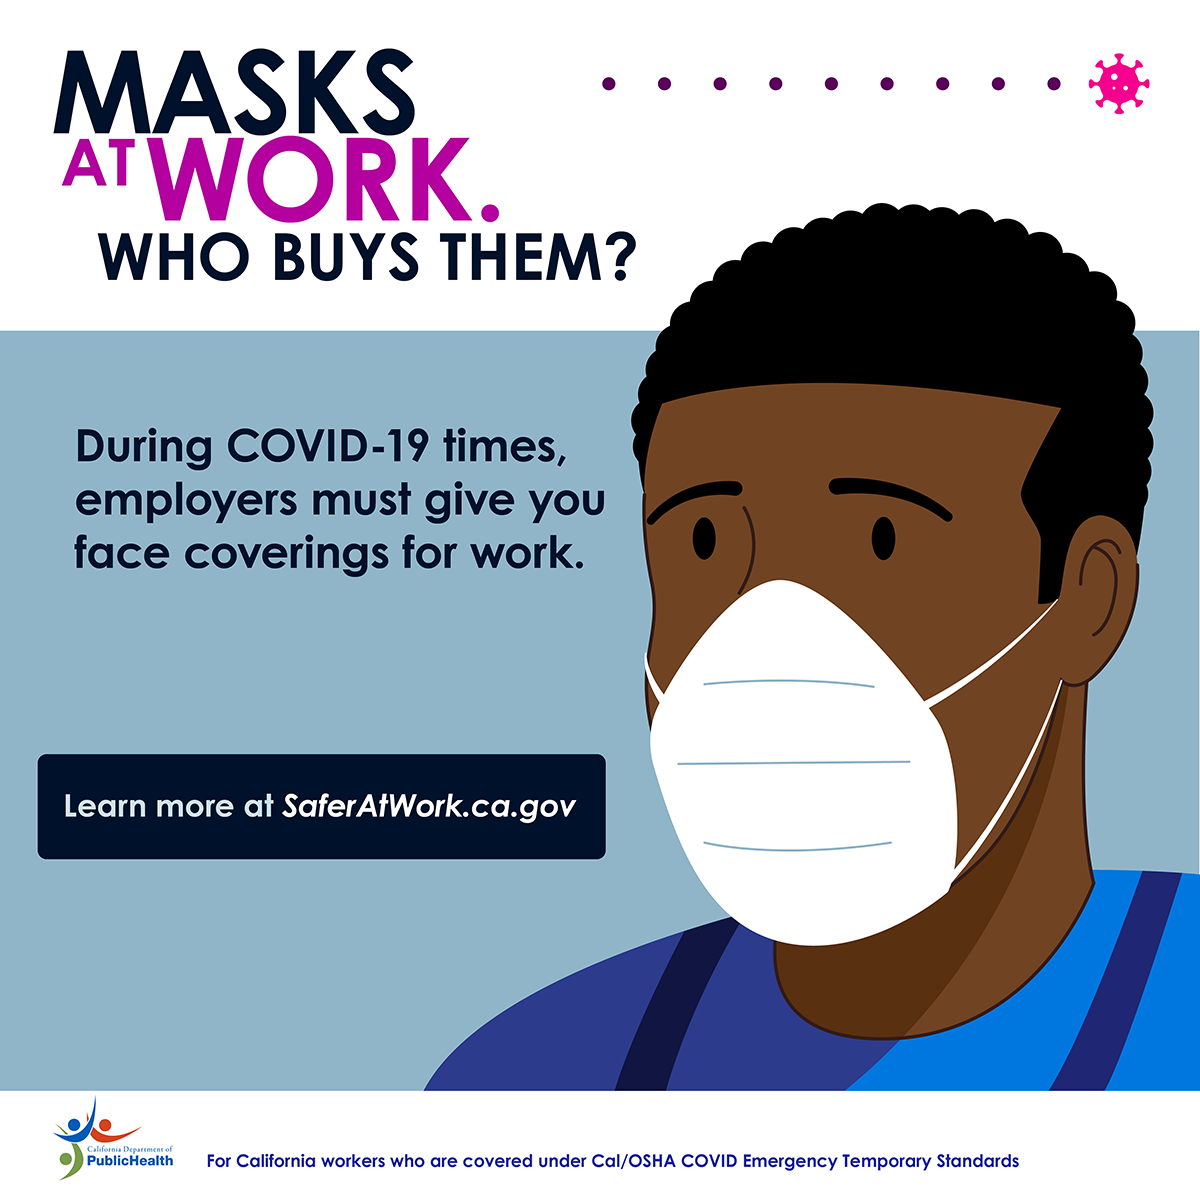 During COVID-19 times, employers must give you face coverings for work.